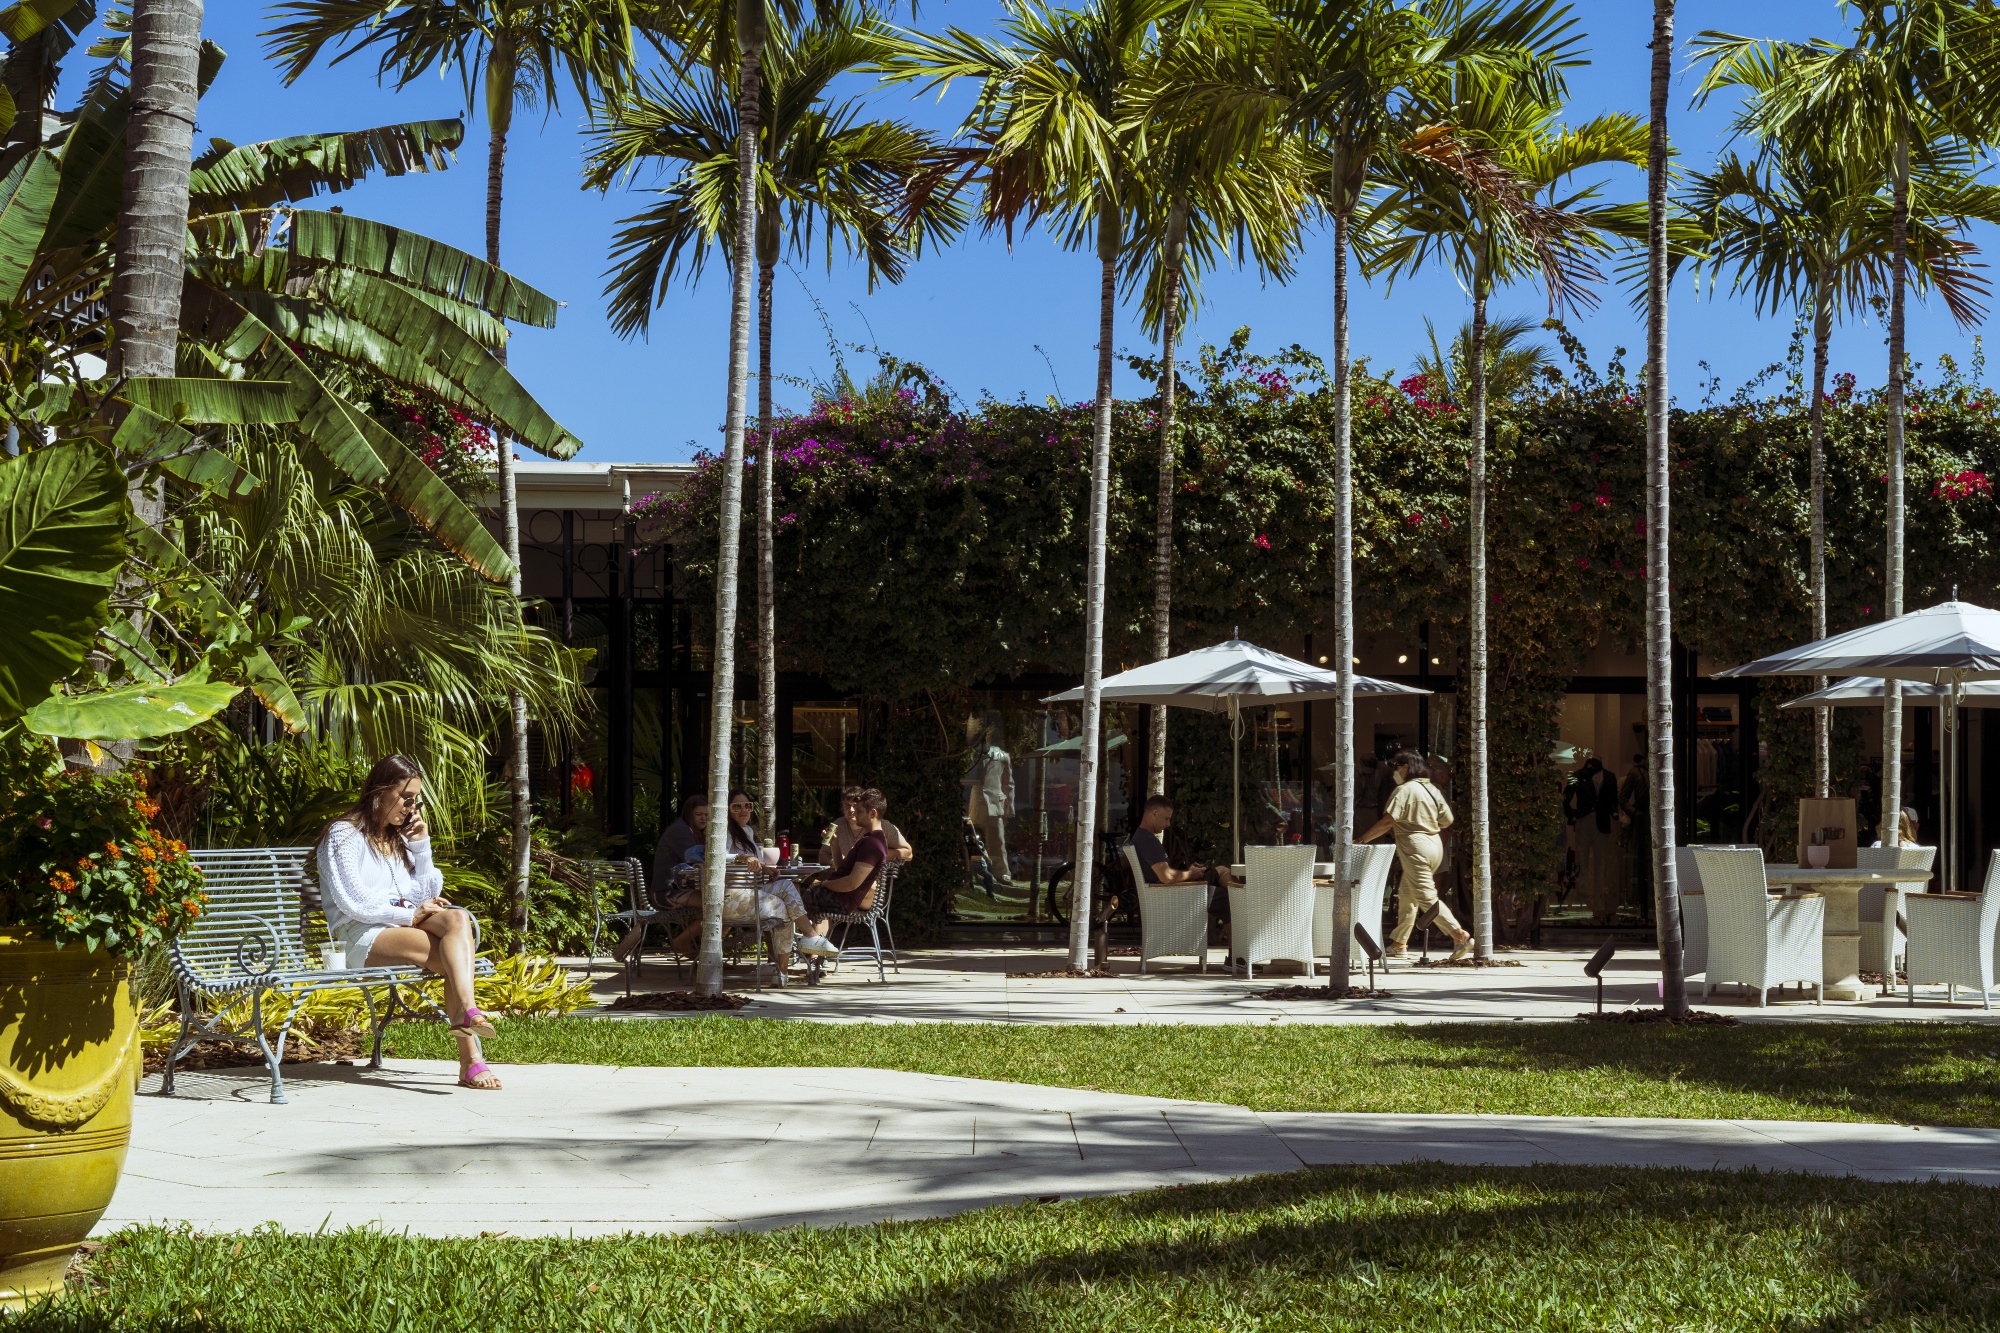 Cartier returns to Palm Beach with seasonal boutique in Royal Poinciana  Plaza